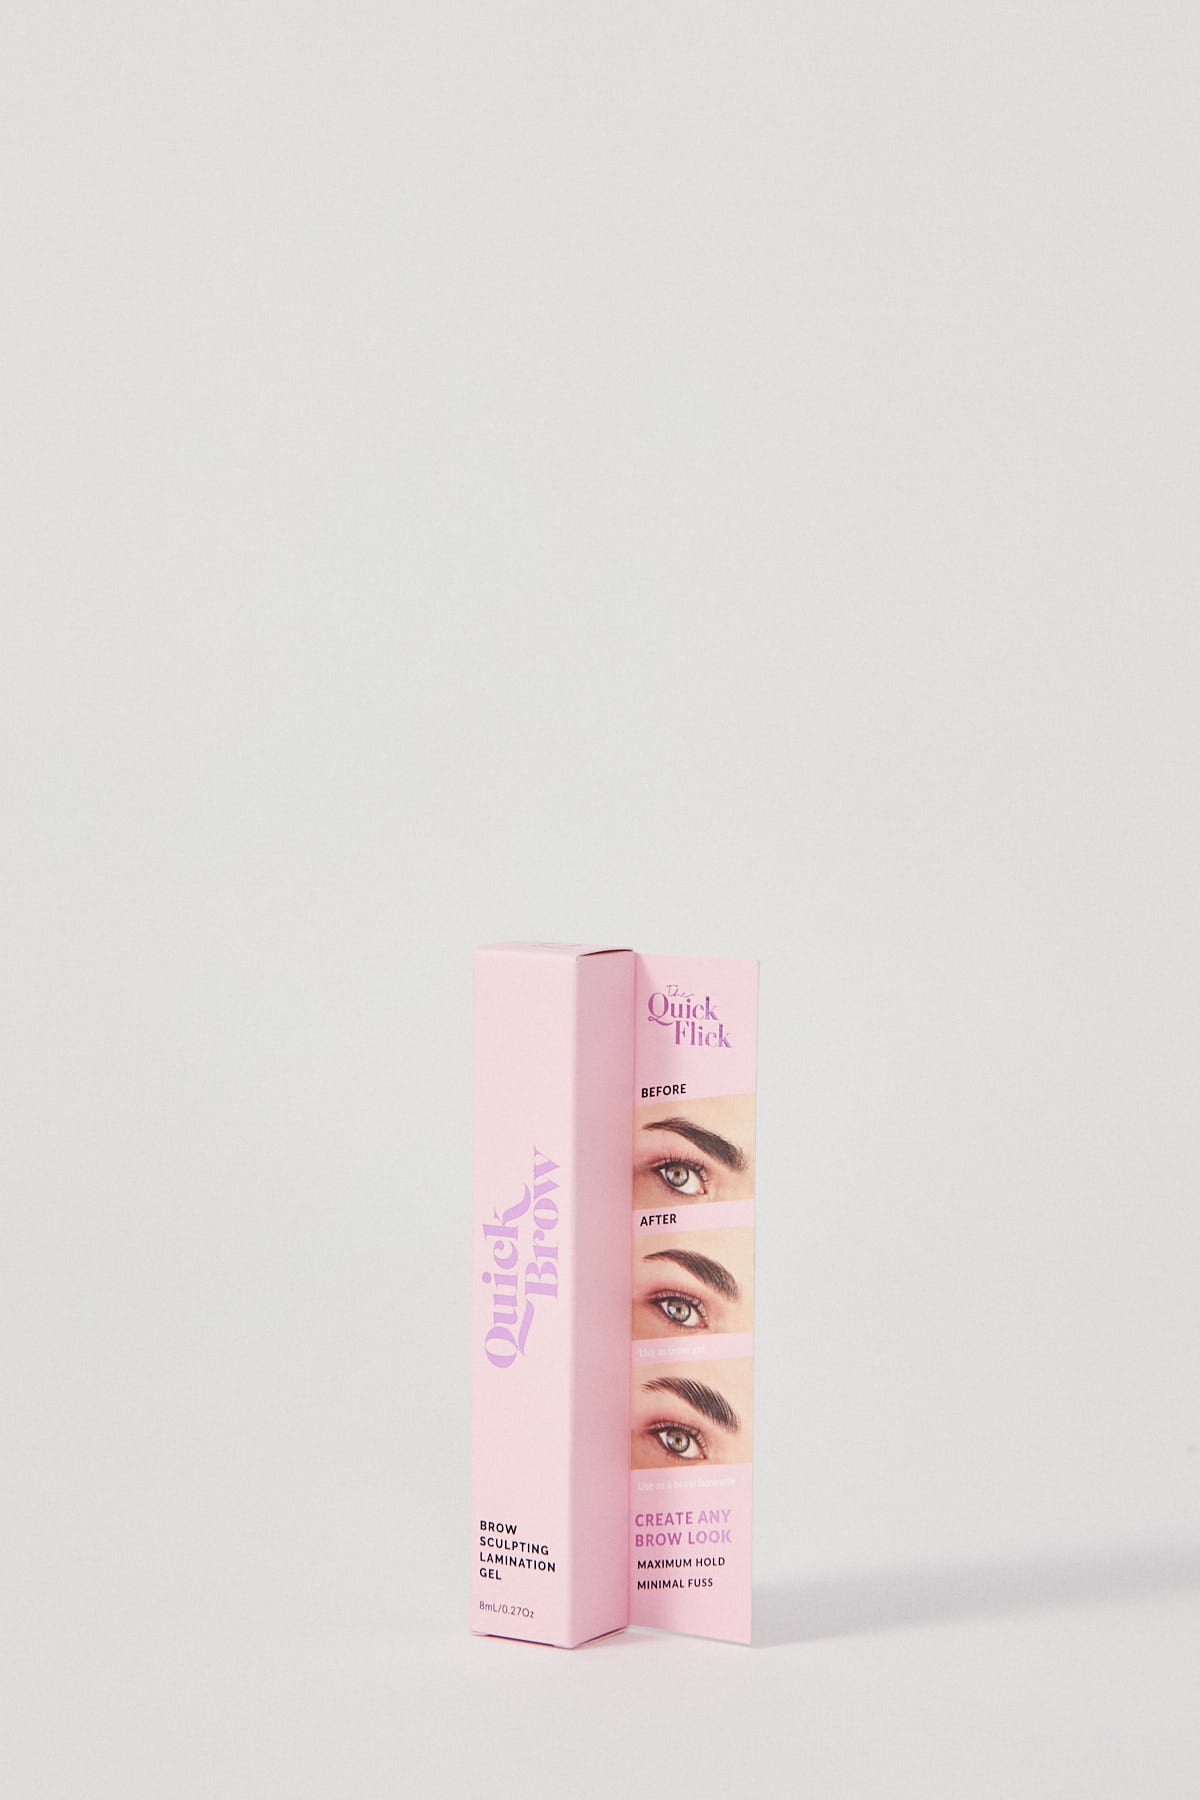 The Quick Flick Quick Brow Sculpting Lamination Gel Clear